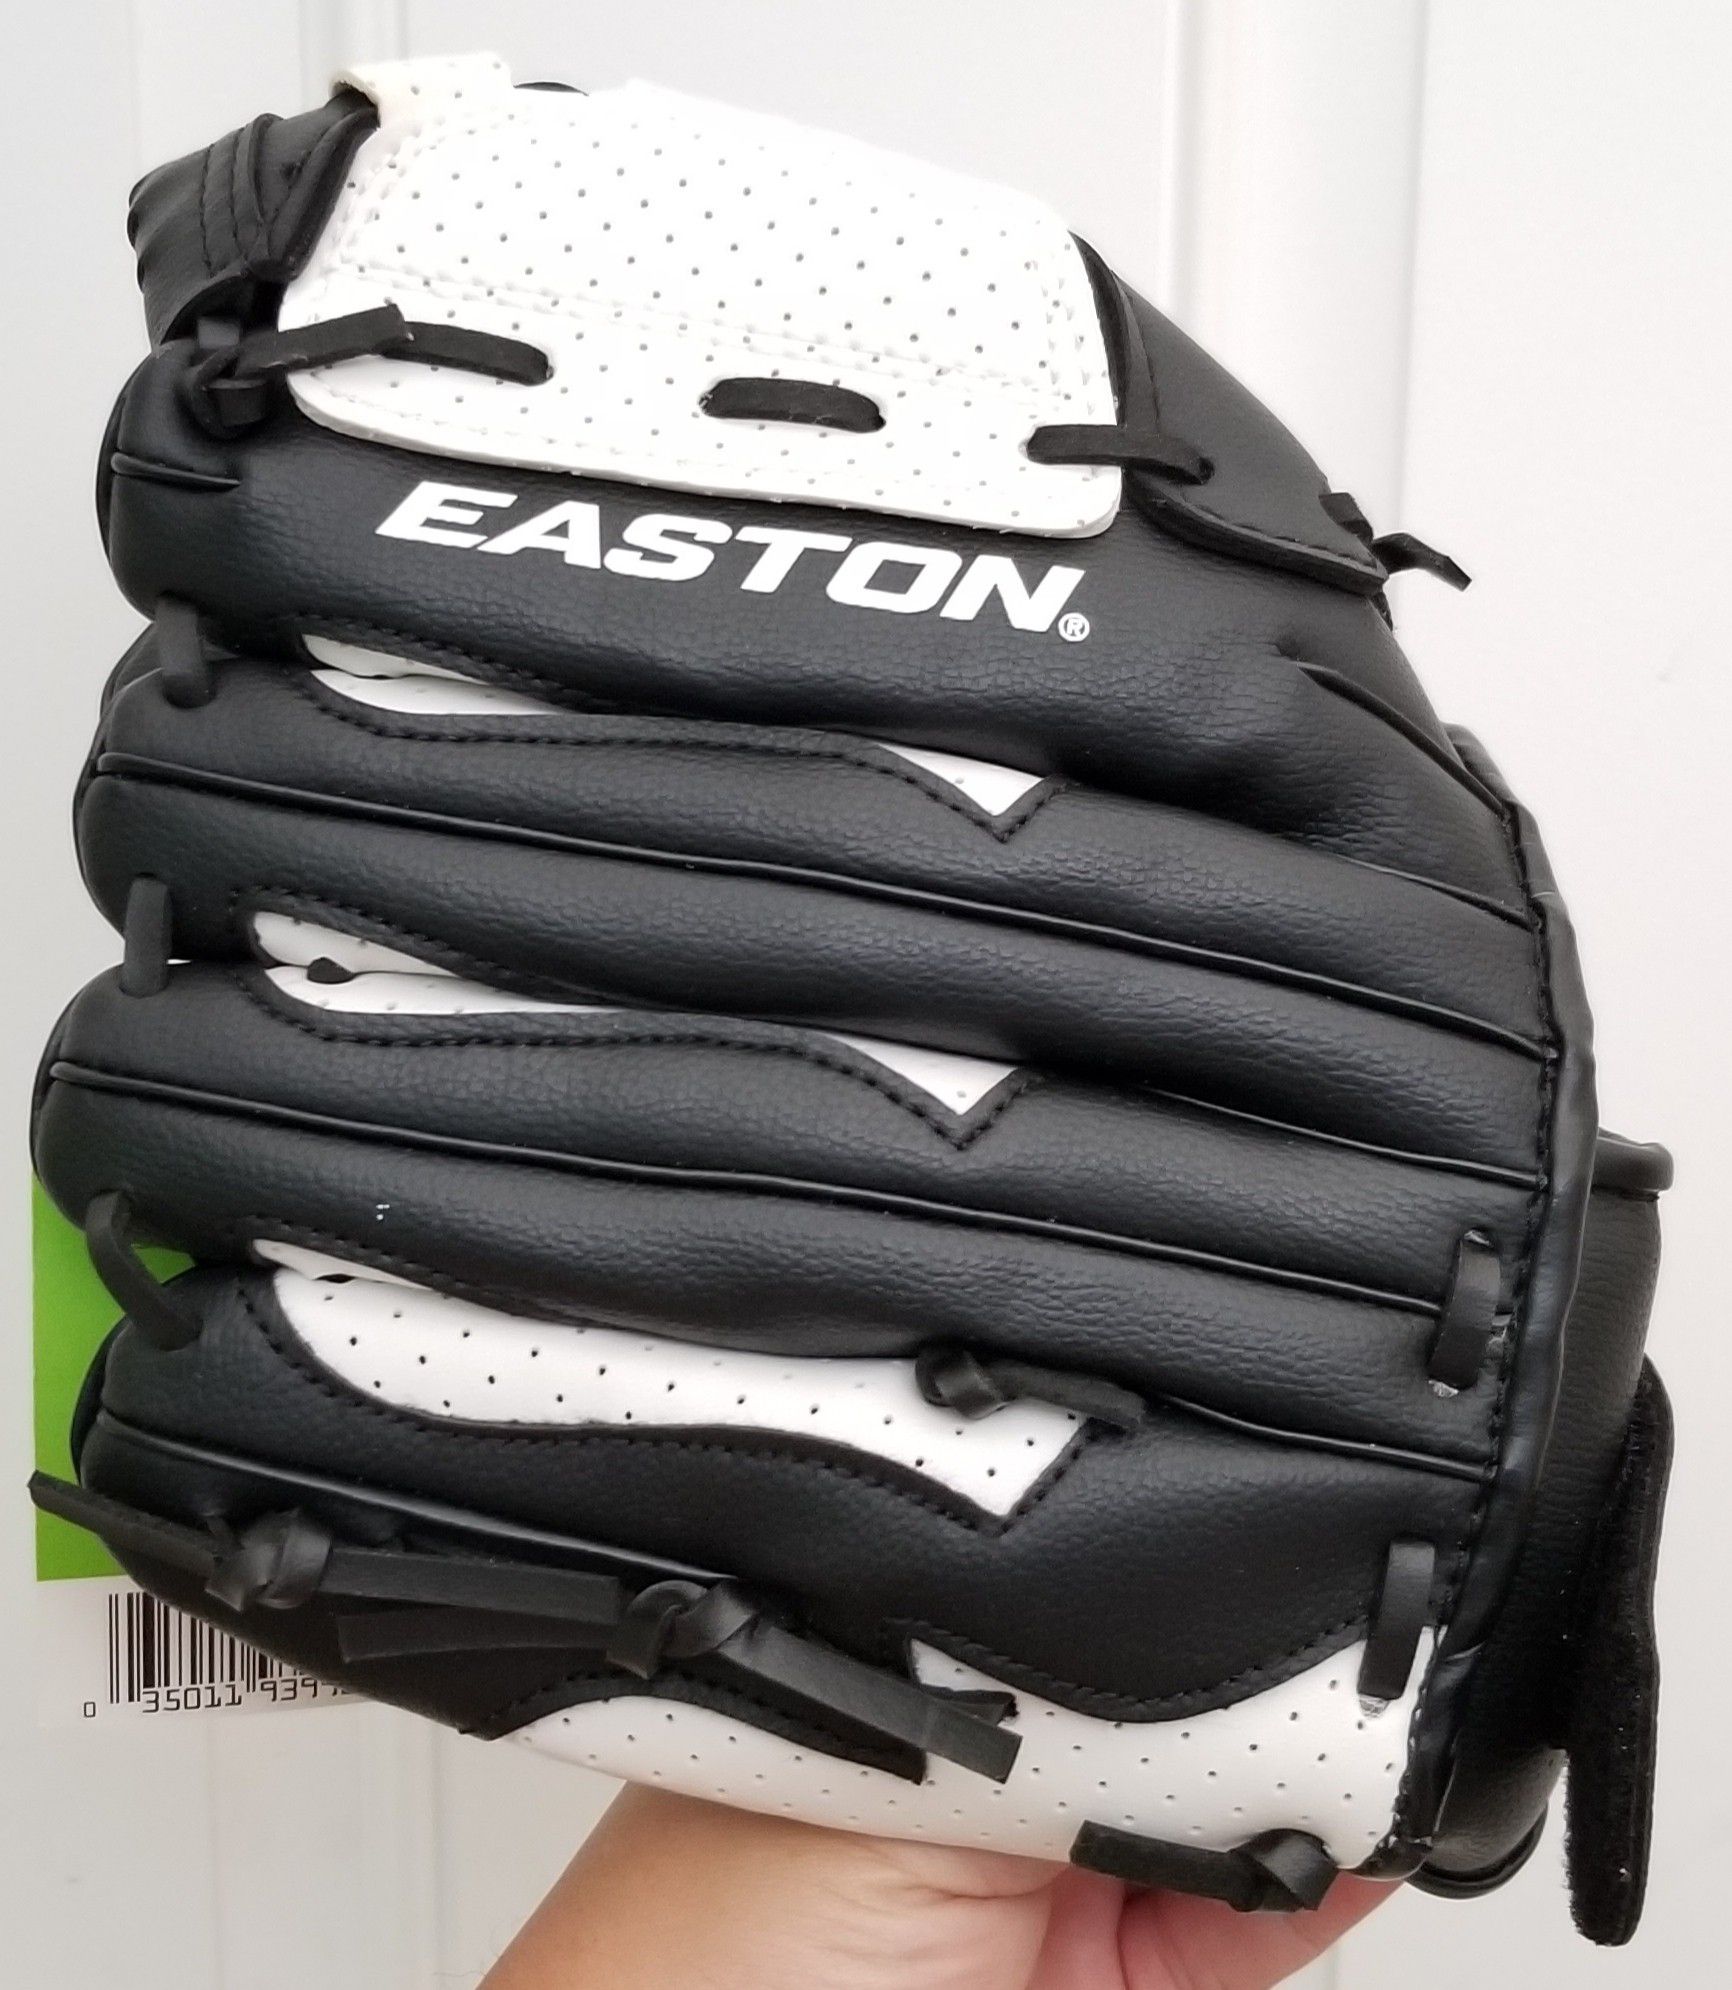 Brand New Easton Youth Fast Pitch Softball Glove (RH) for sale $15